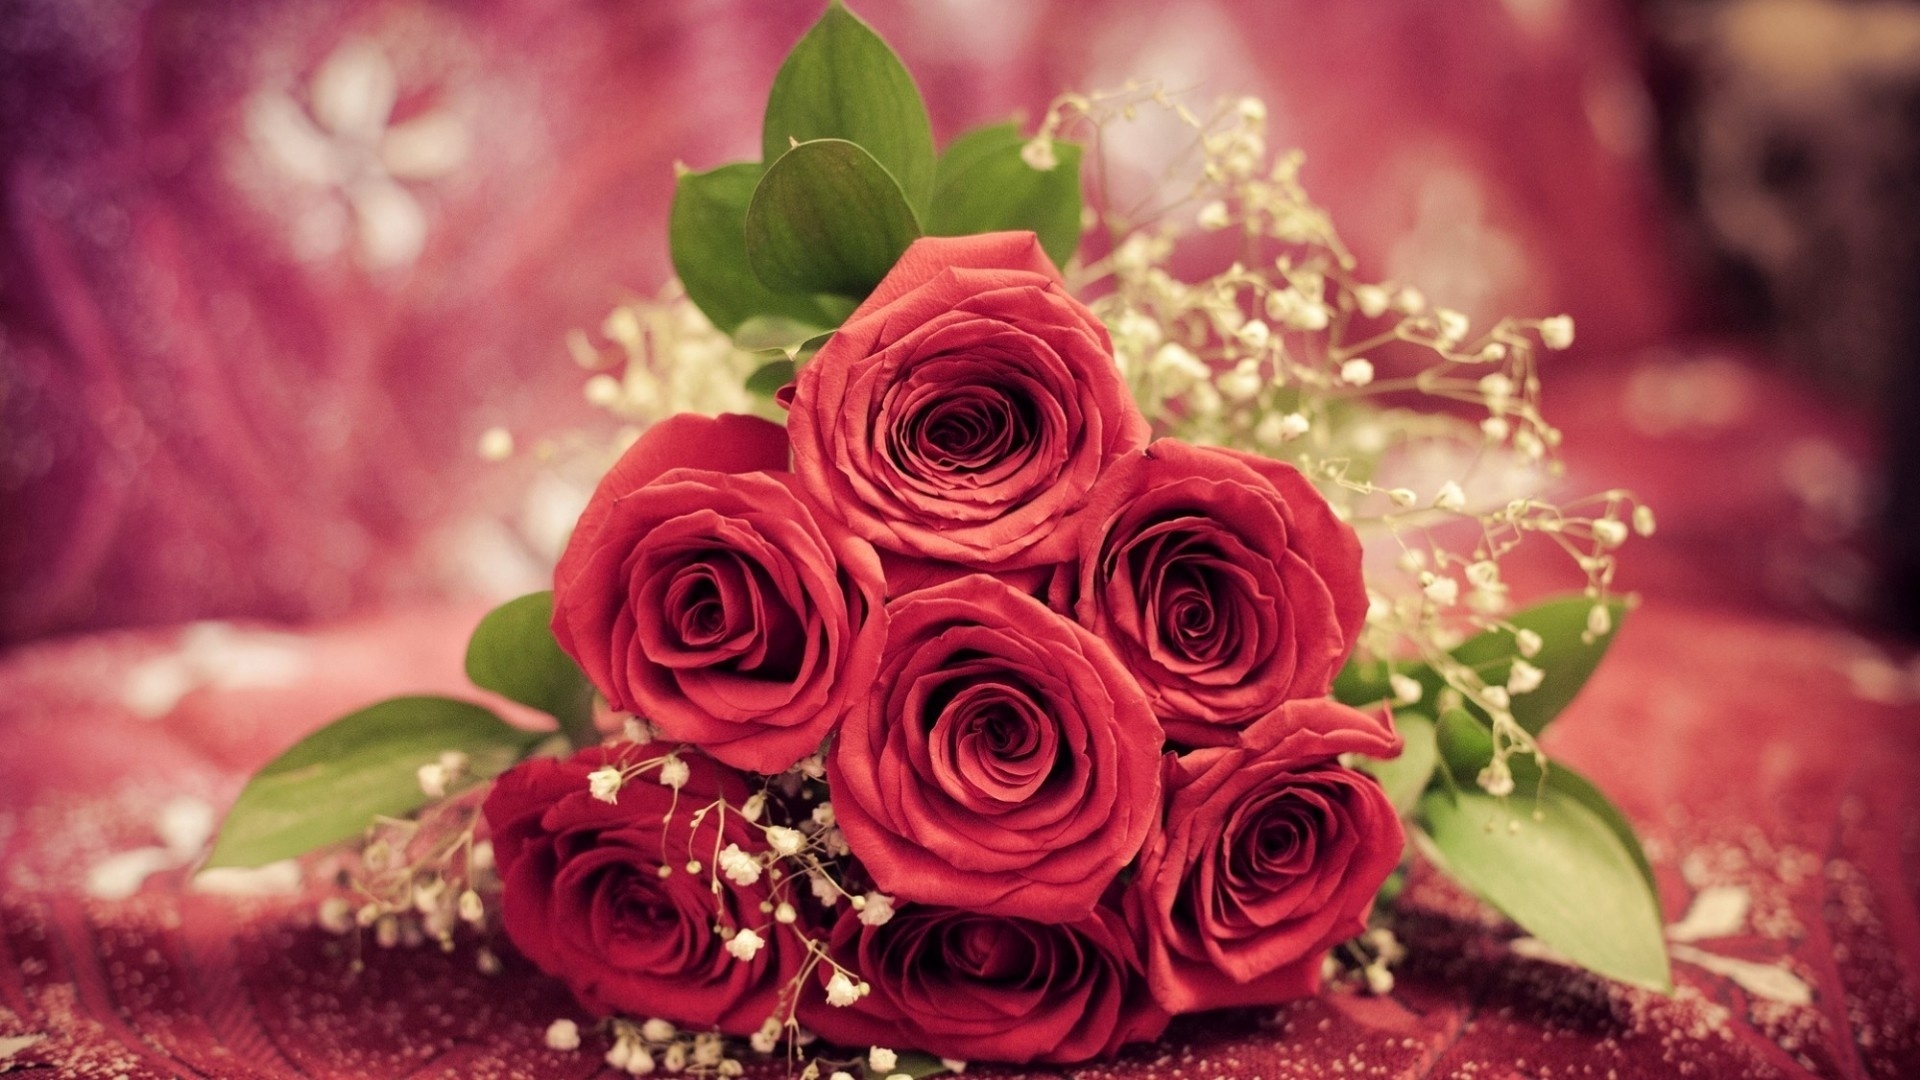 bunch of roses wallpapers,flower,garden roses,bouquet,red,pink